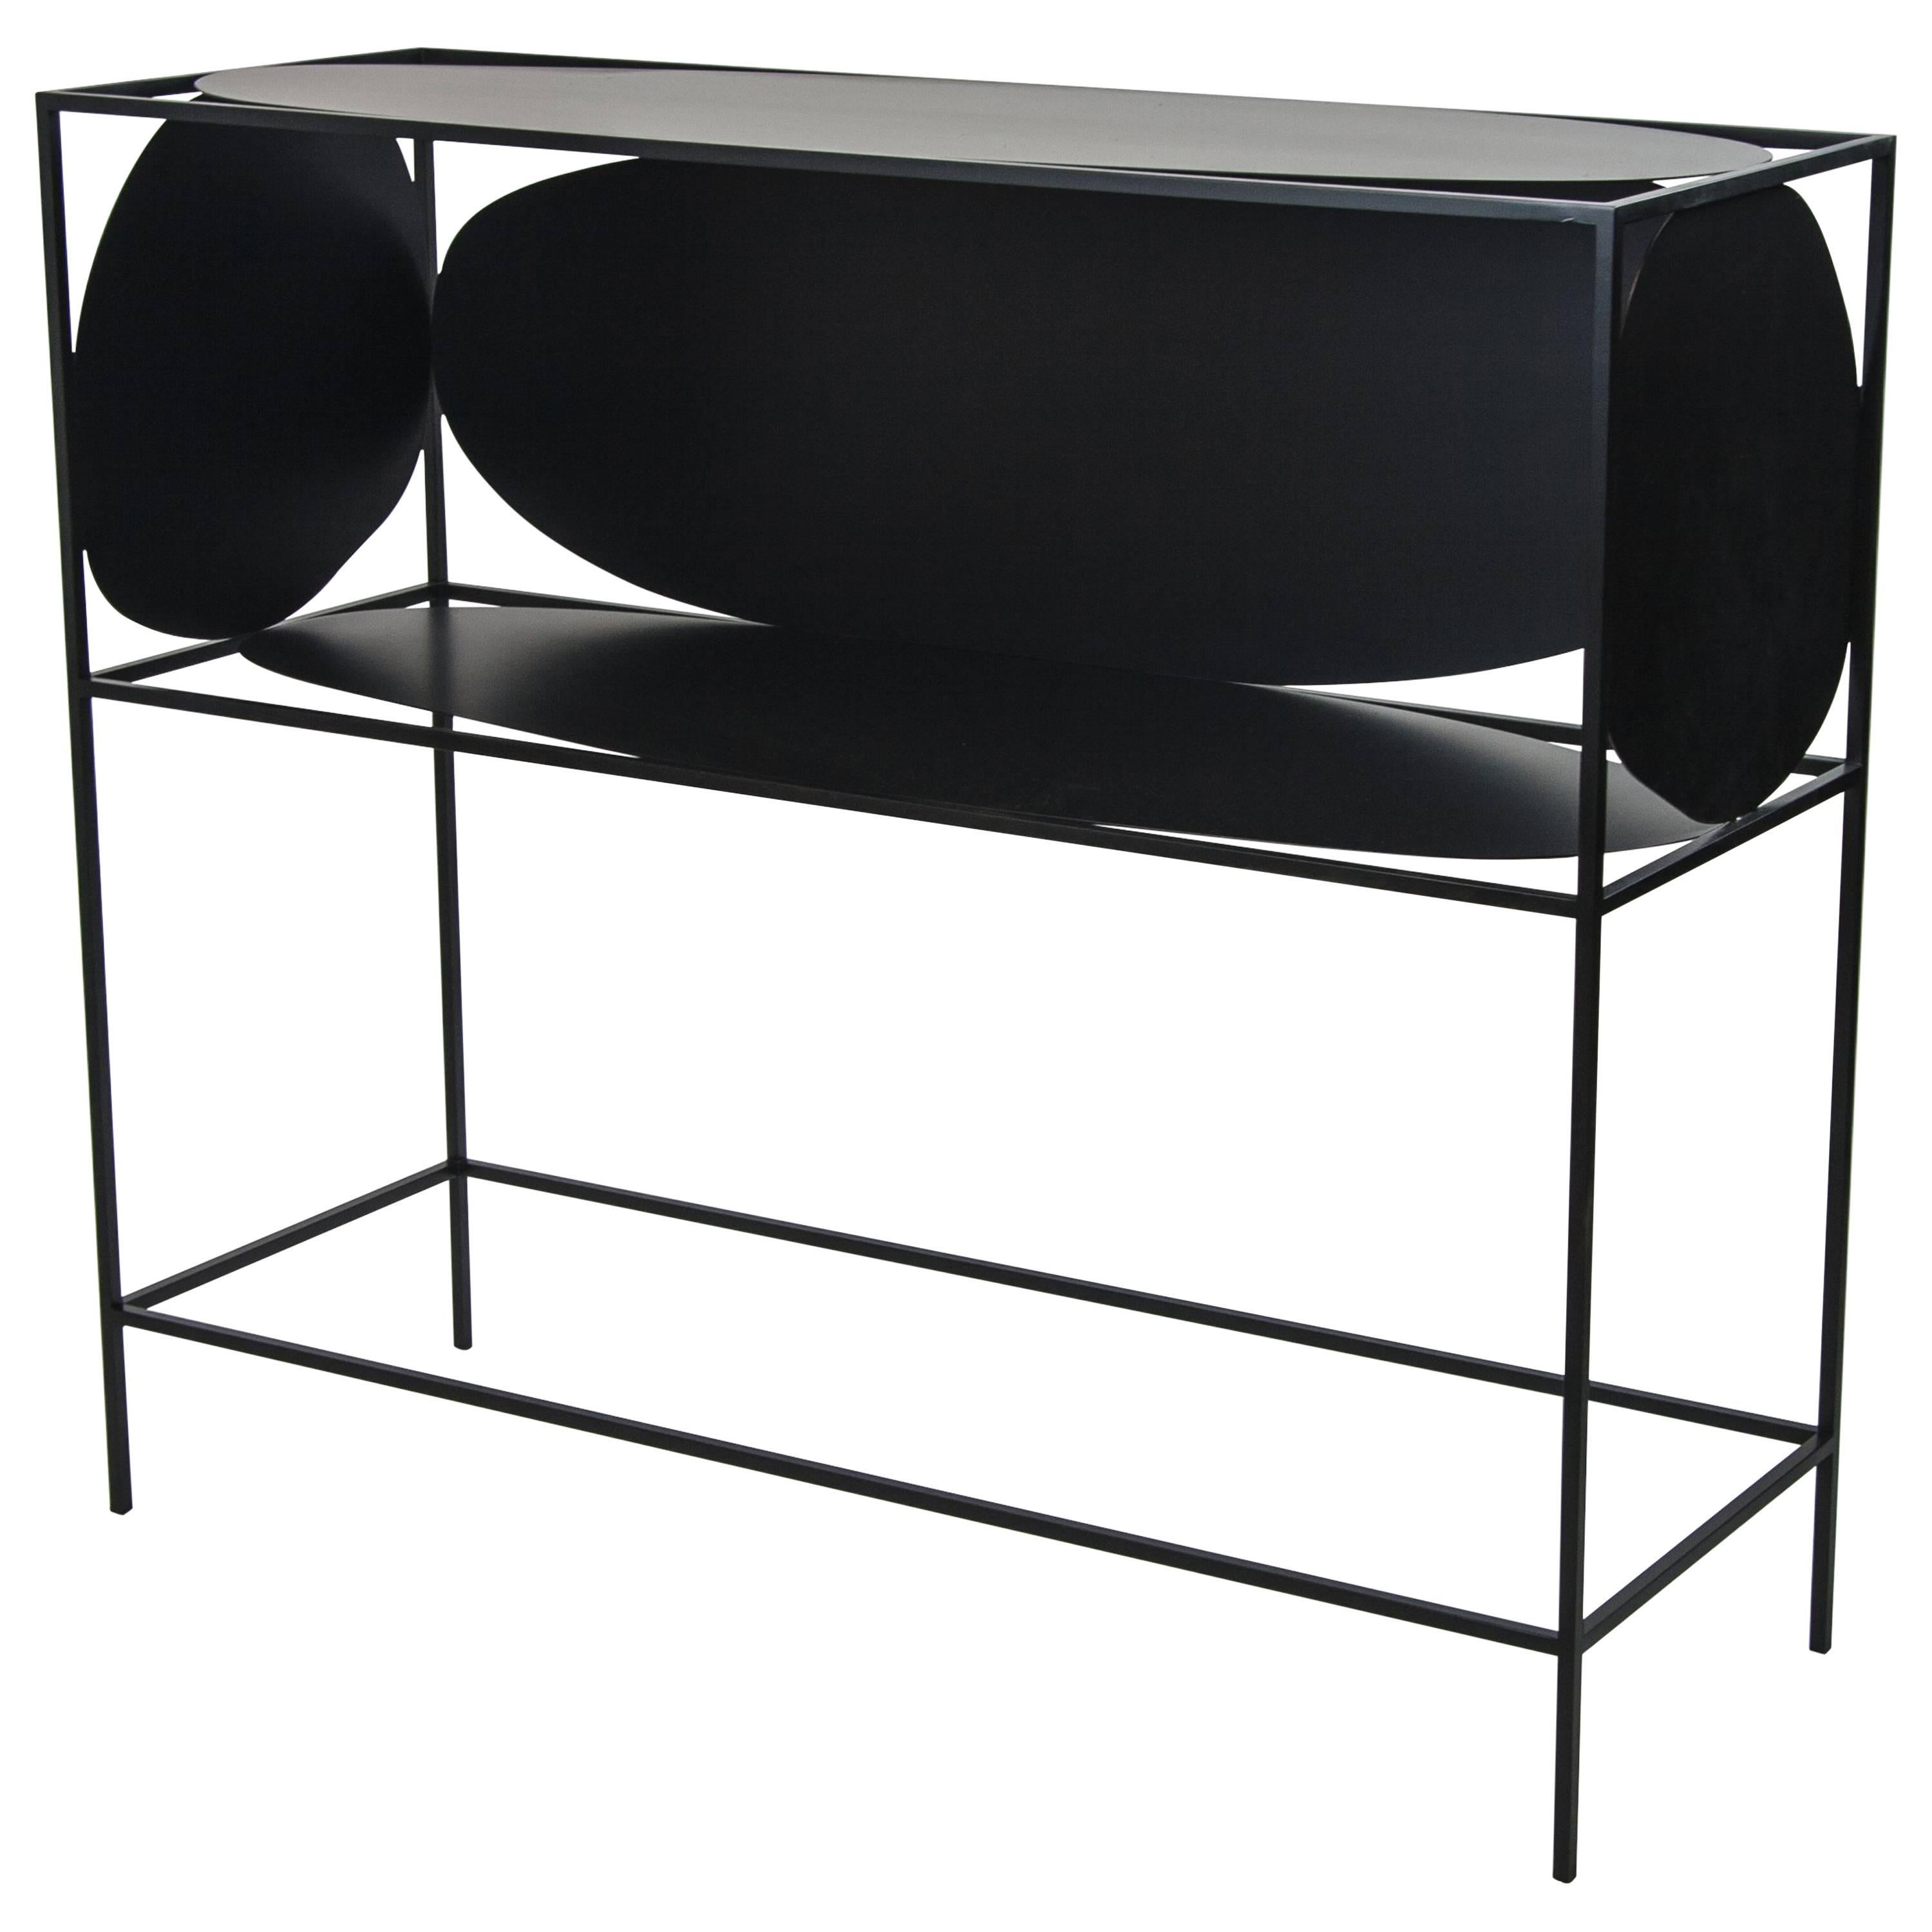 A study in positive and negative space, the modern contemporary black steel metal Ahn credenza bar or buffet is ever changing depending on how it is positioned and viewed in a room. With its five different asymmetrical and organic surfaces, Ahn is a